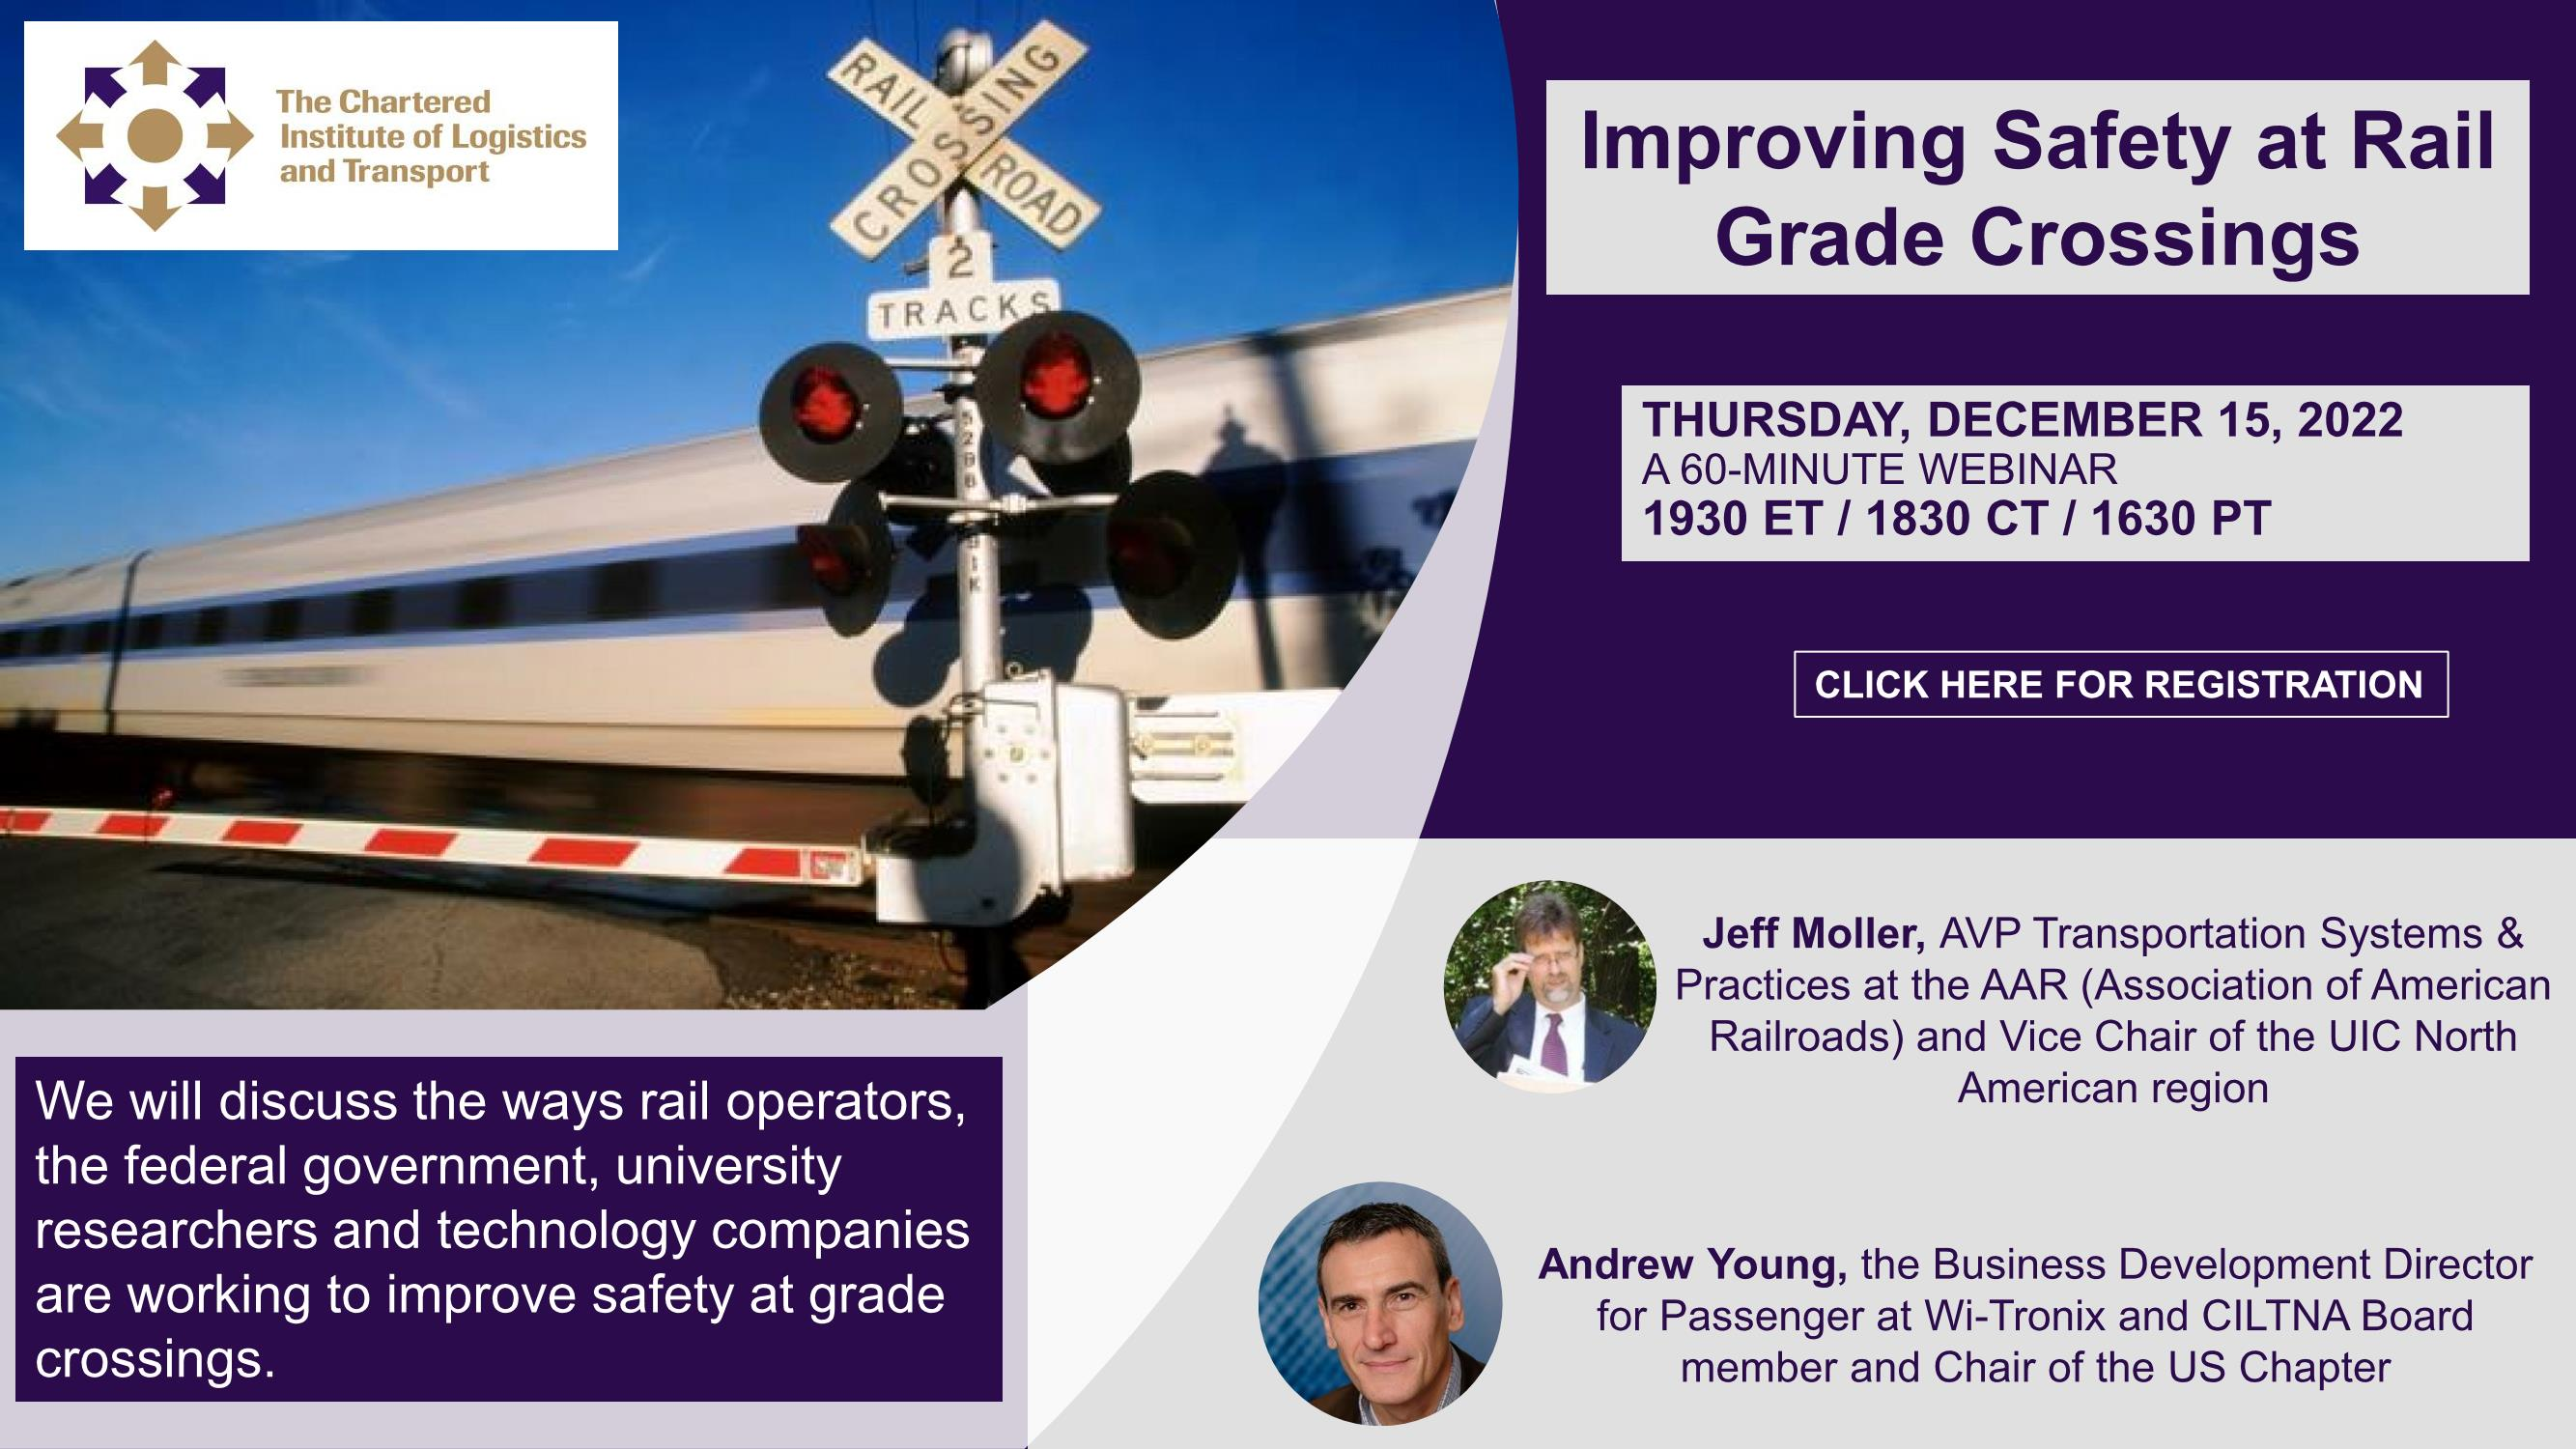 CILTNA US Member Forum Webinar - Improving Safety at Rail Grade Crossings with guest speakers Jeff Moller and Andrew Young